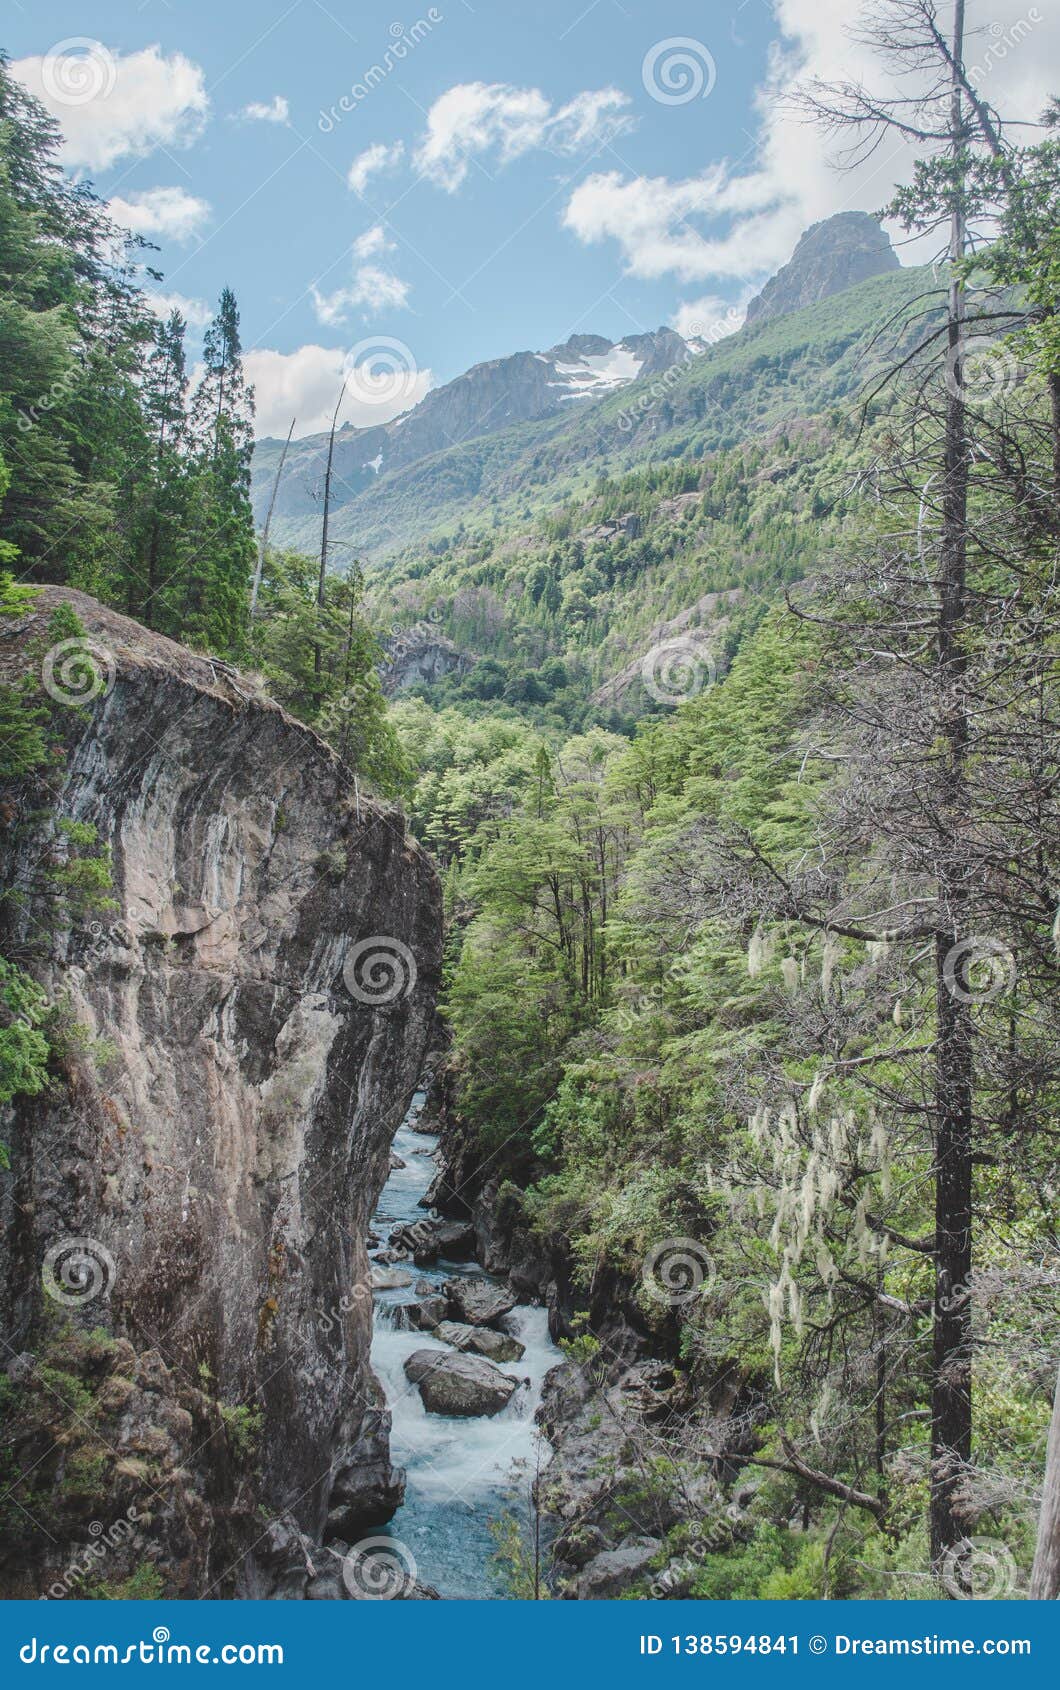 Snowy Mountain Behind, River between Forest with Green Trees Stock ...